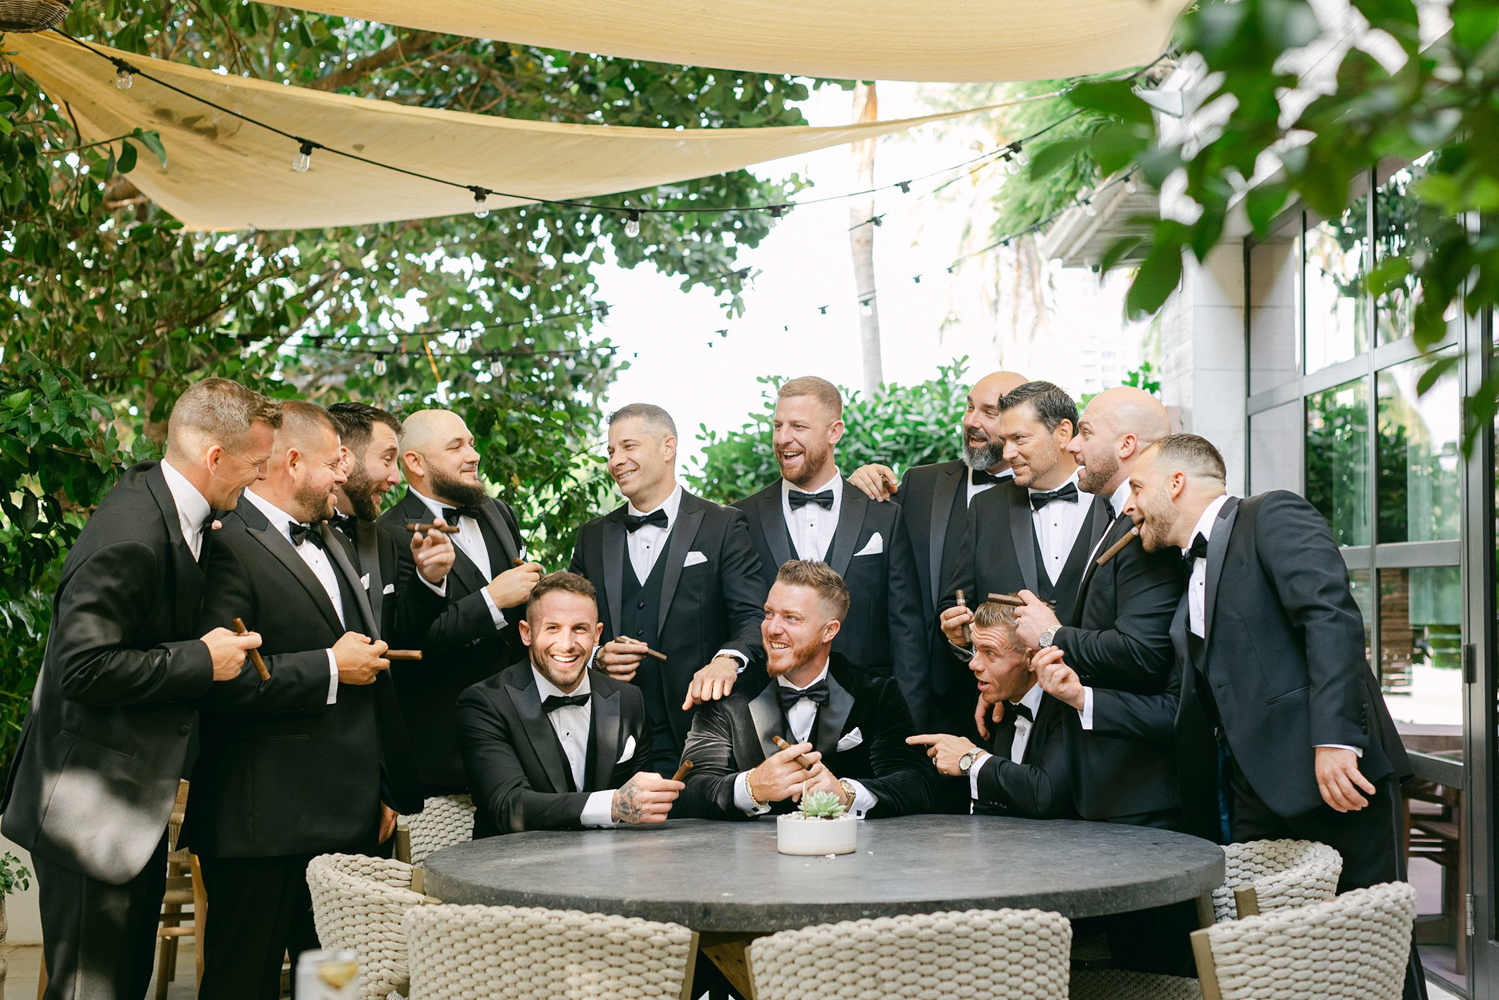 groom and groomsmen siting together ina group laughing while smoking cigars